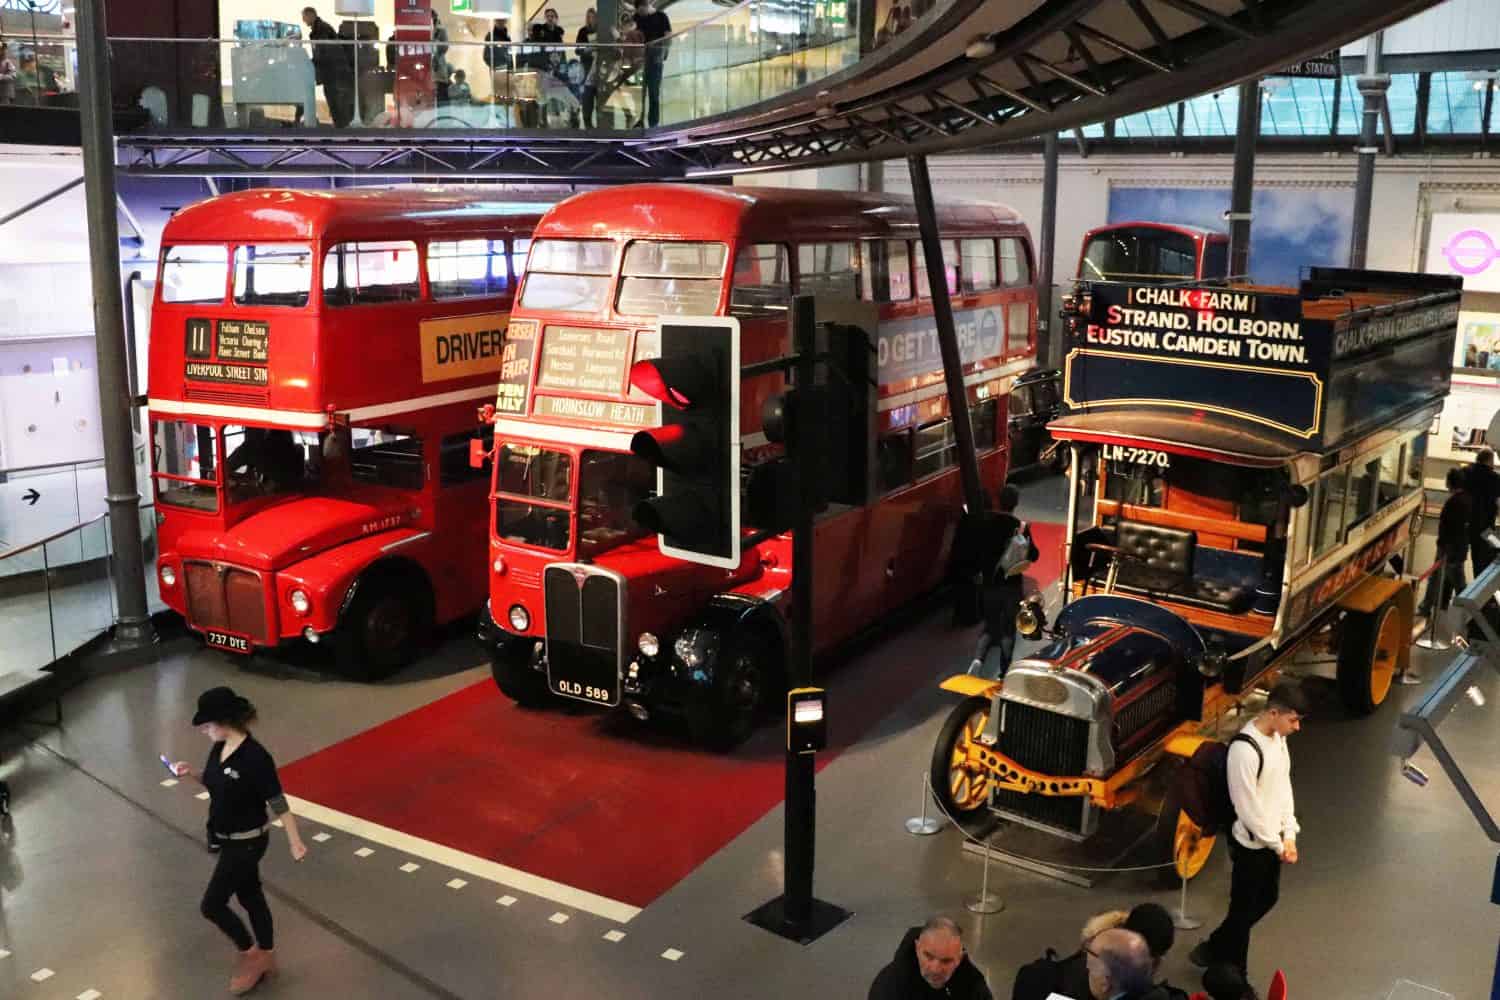 Our first visit to the London Transport Museum